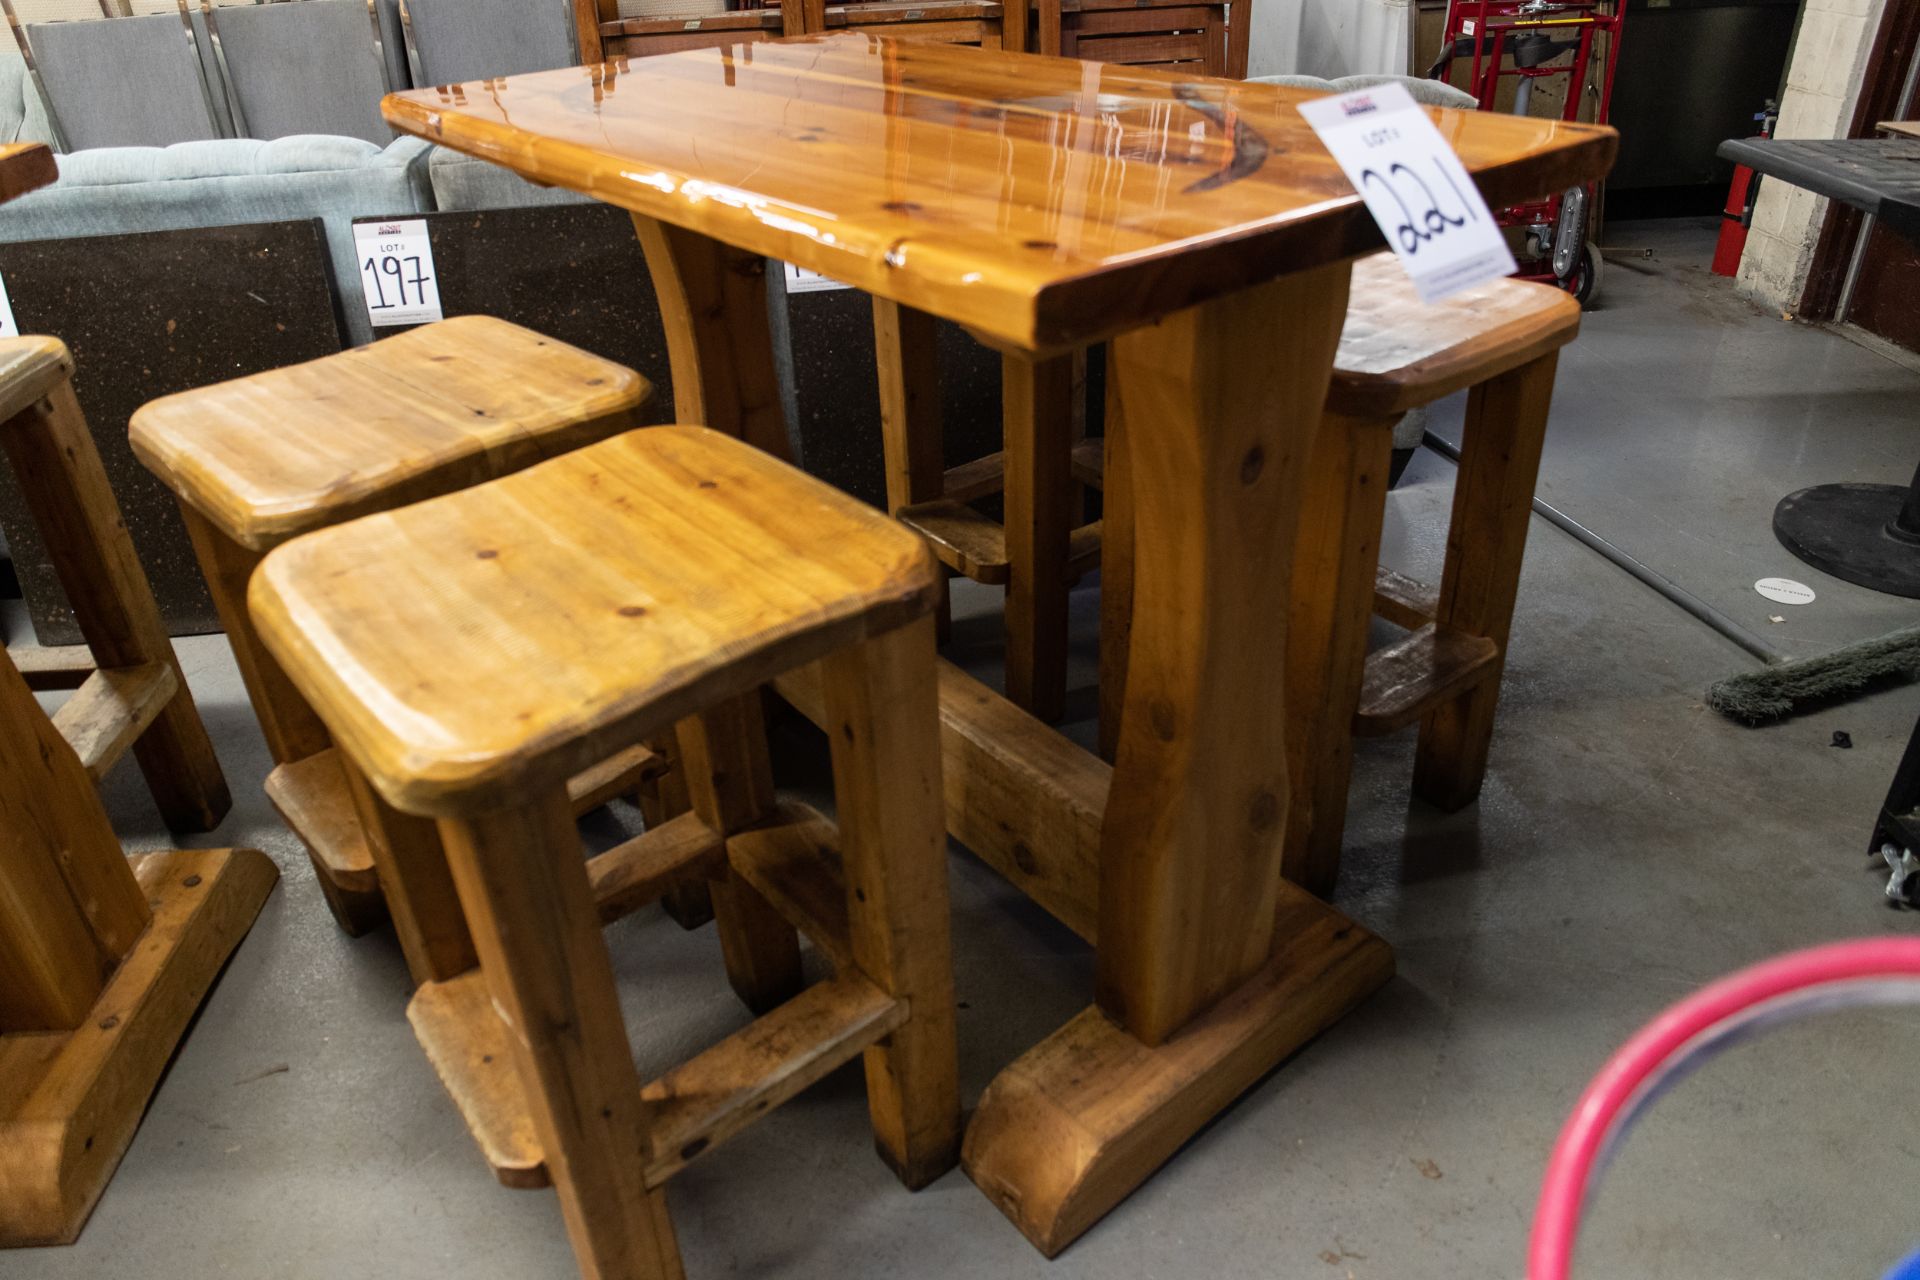 4' WHITE PINE HIGH TOP TABLE WITH 4 STOOLS H-42" W-28" L-48" - Image 3 of 3